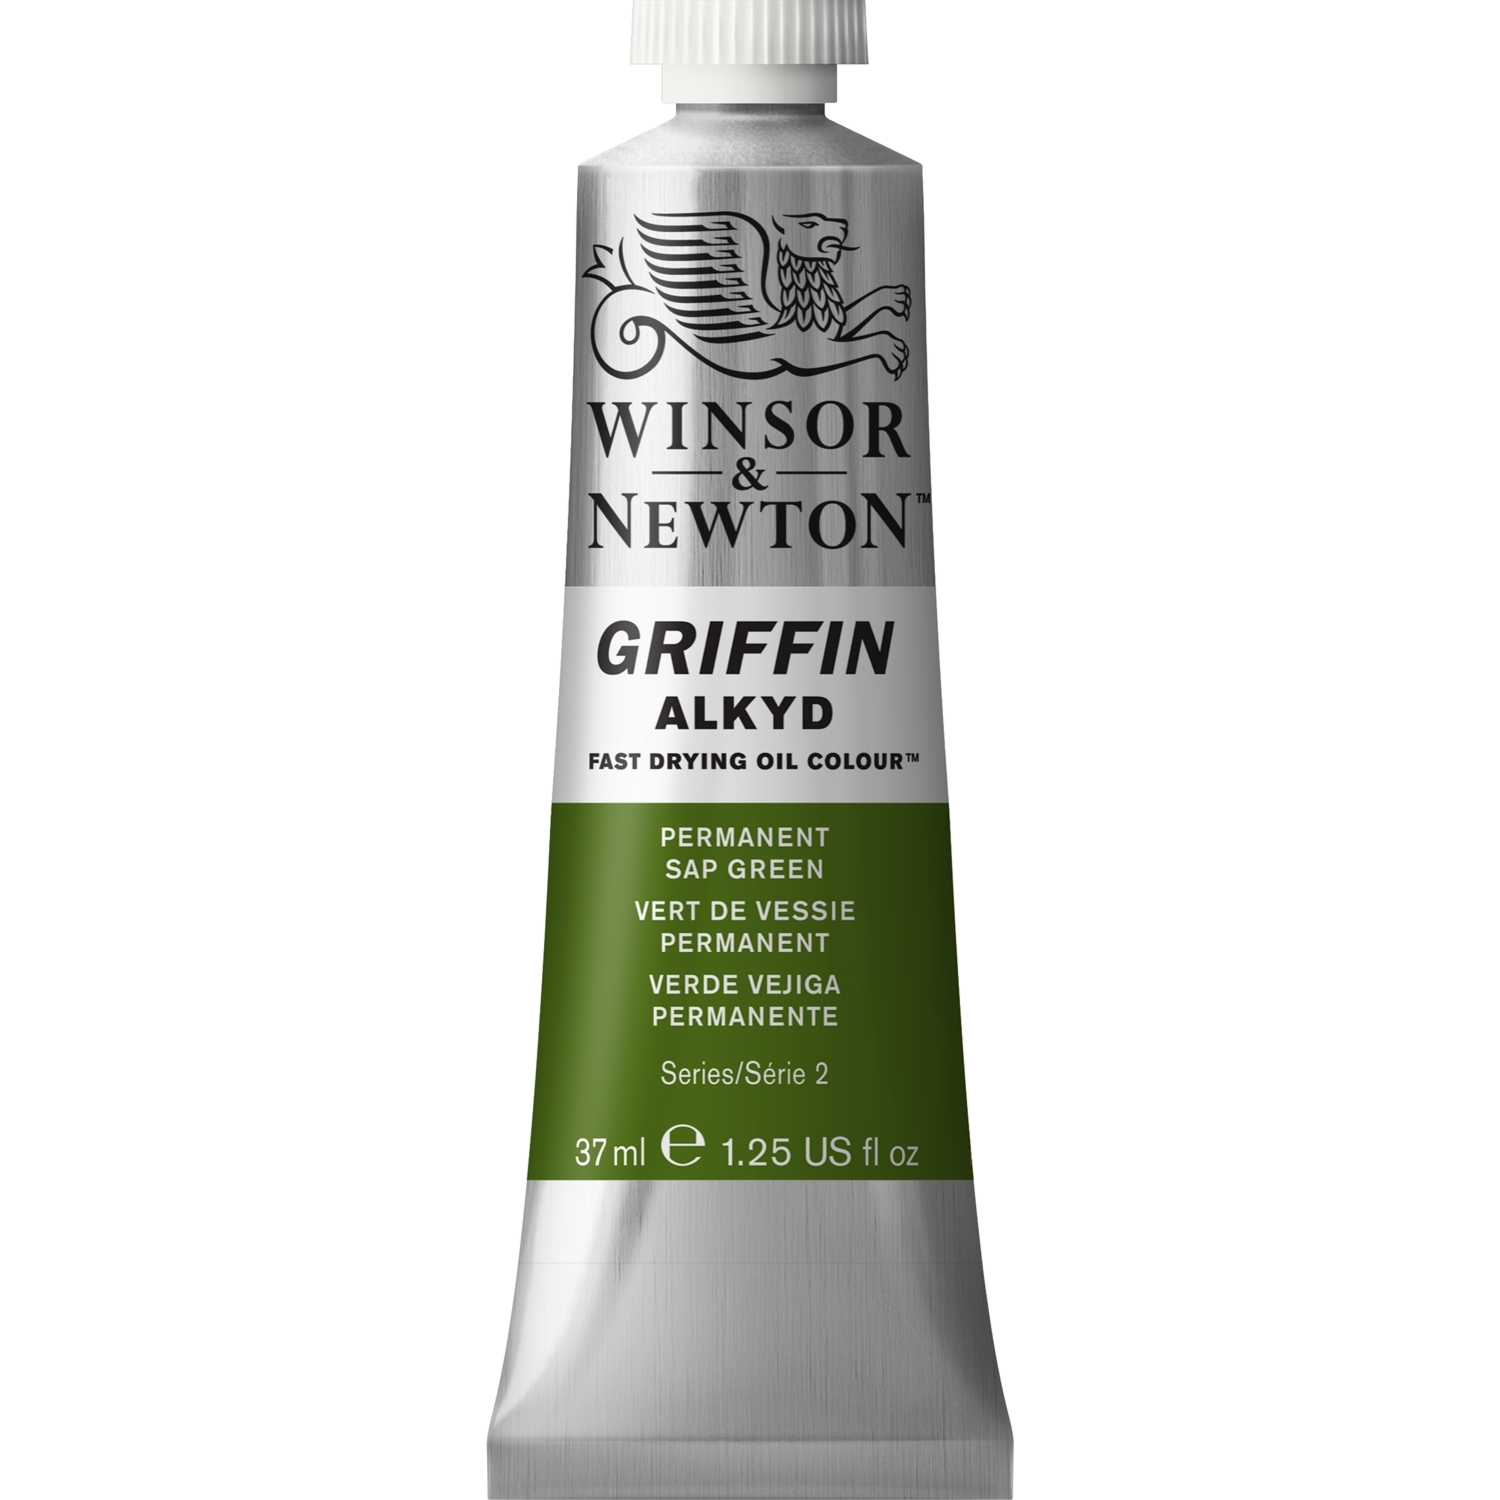 Winsor and Newton Griffin Alkyd Oil Colour - Sap Green Image 1